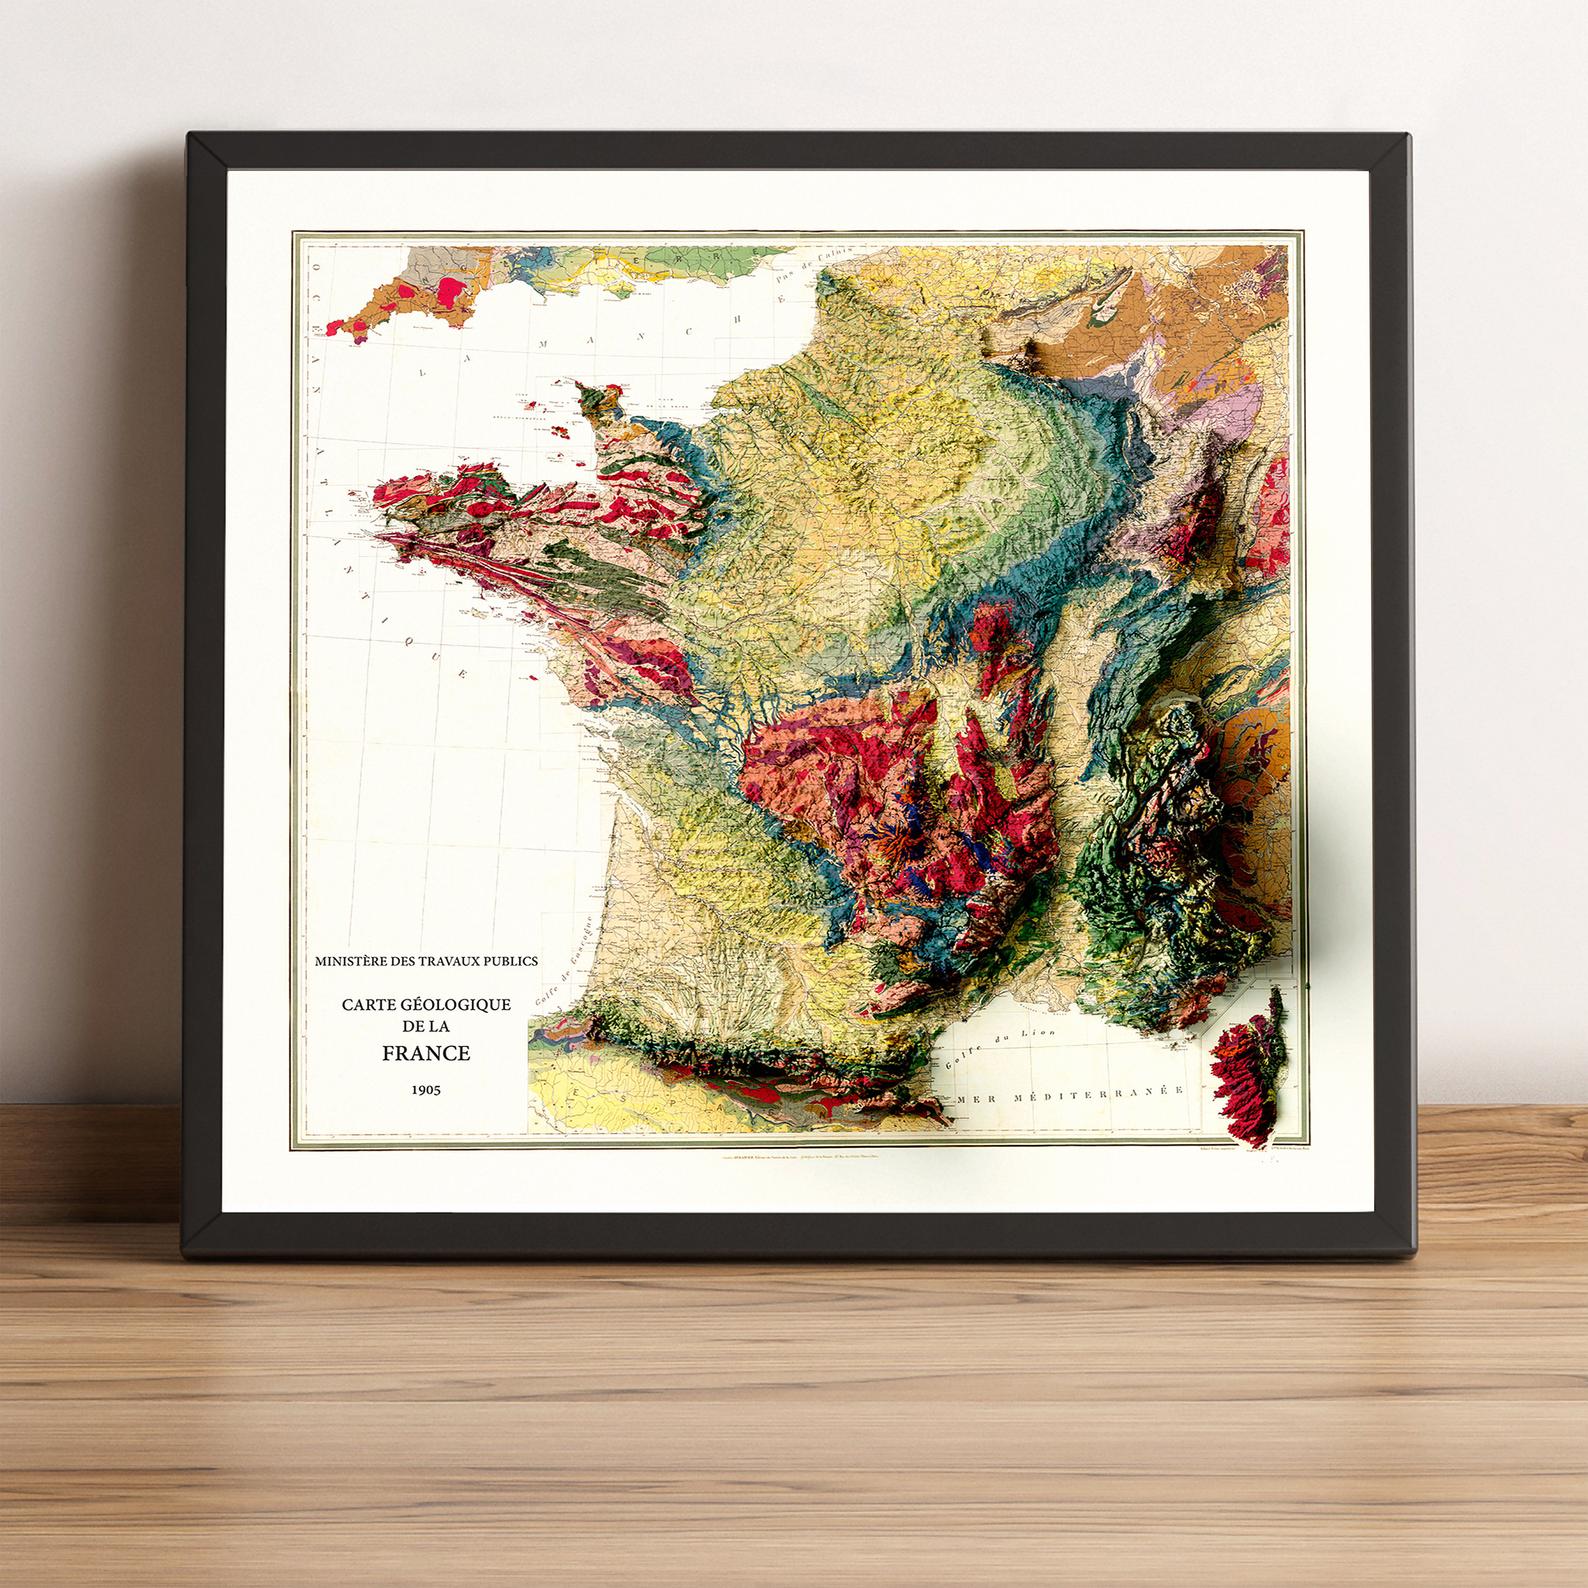 Image showing a vintage relief map of France